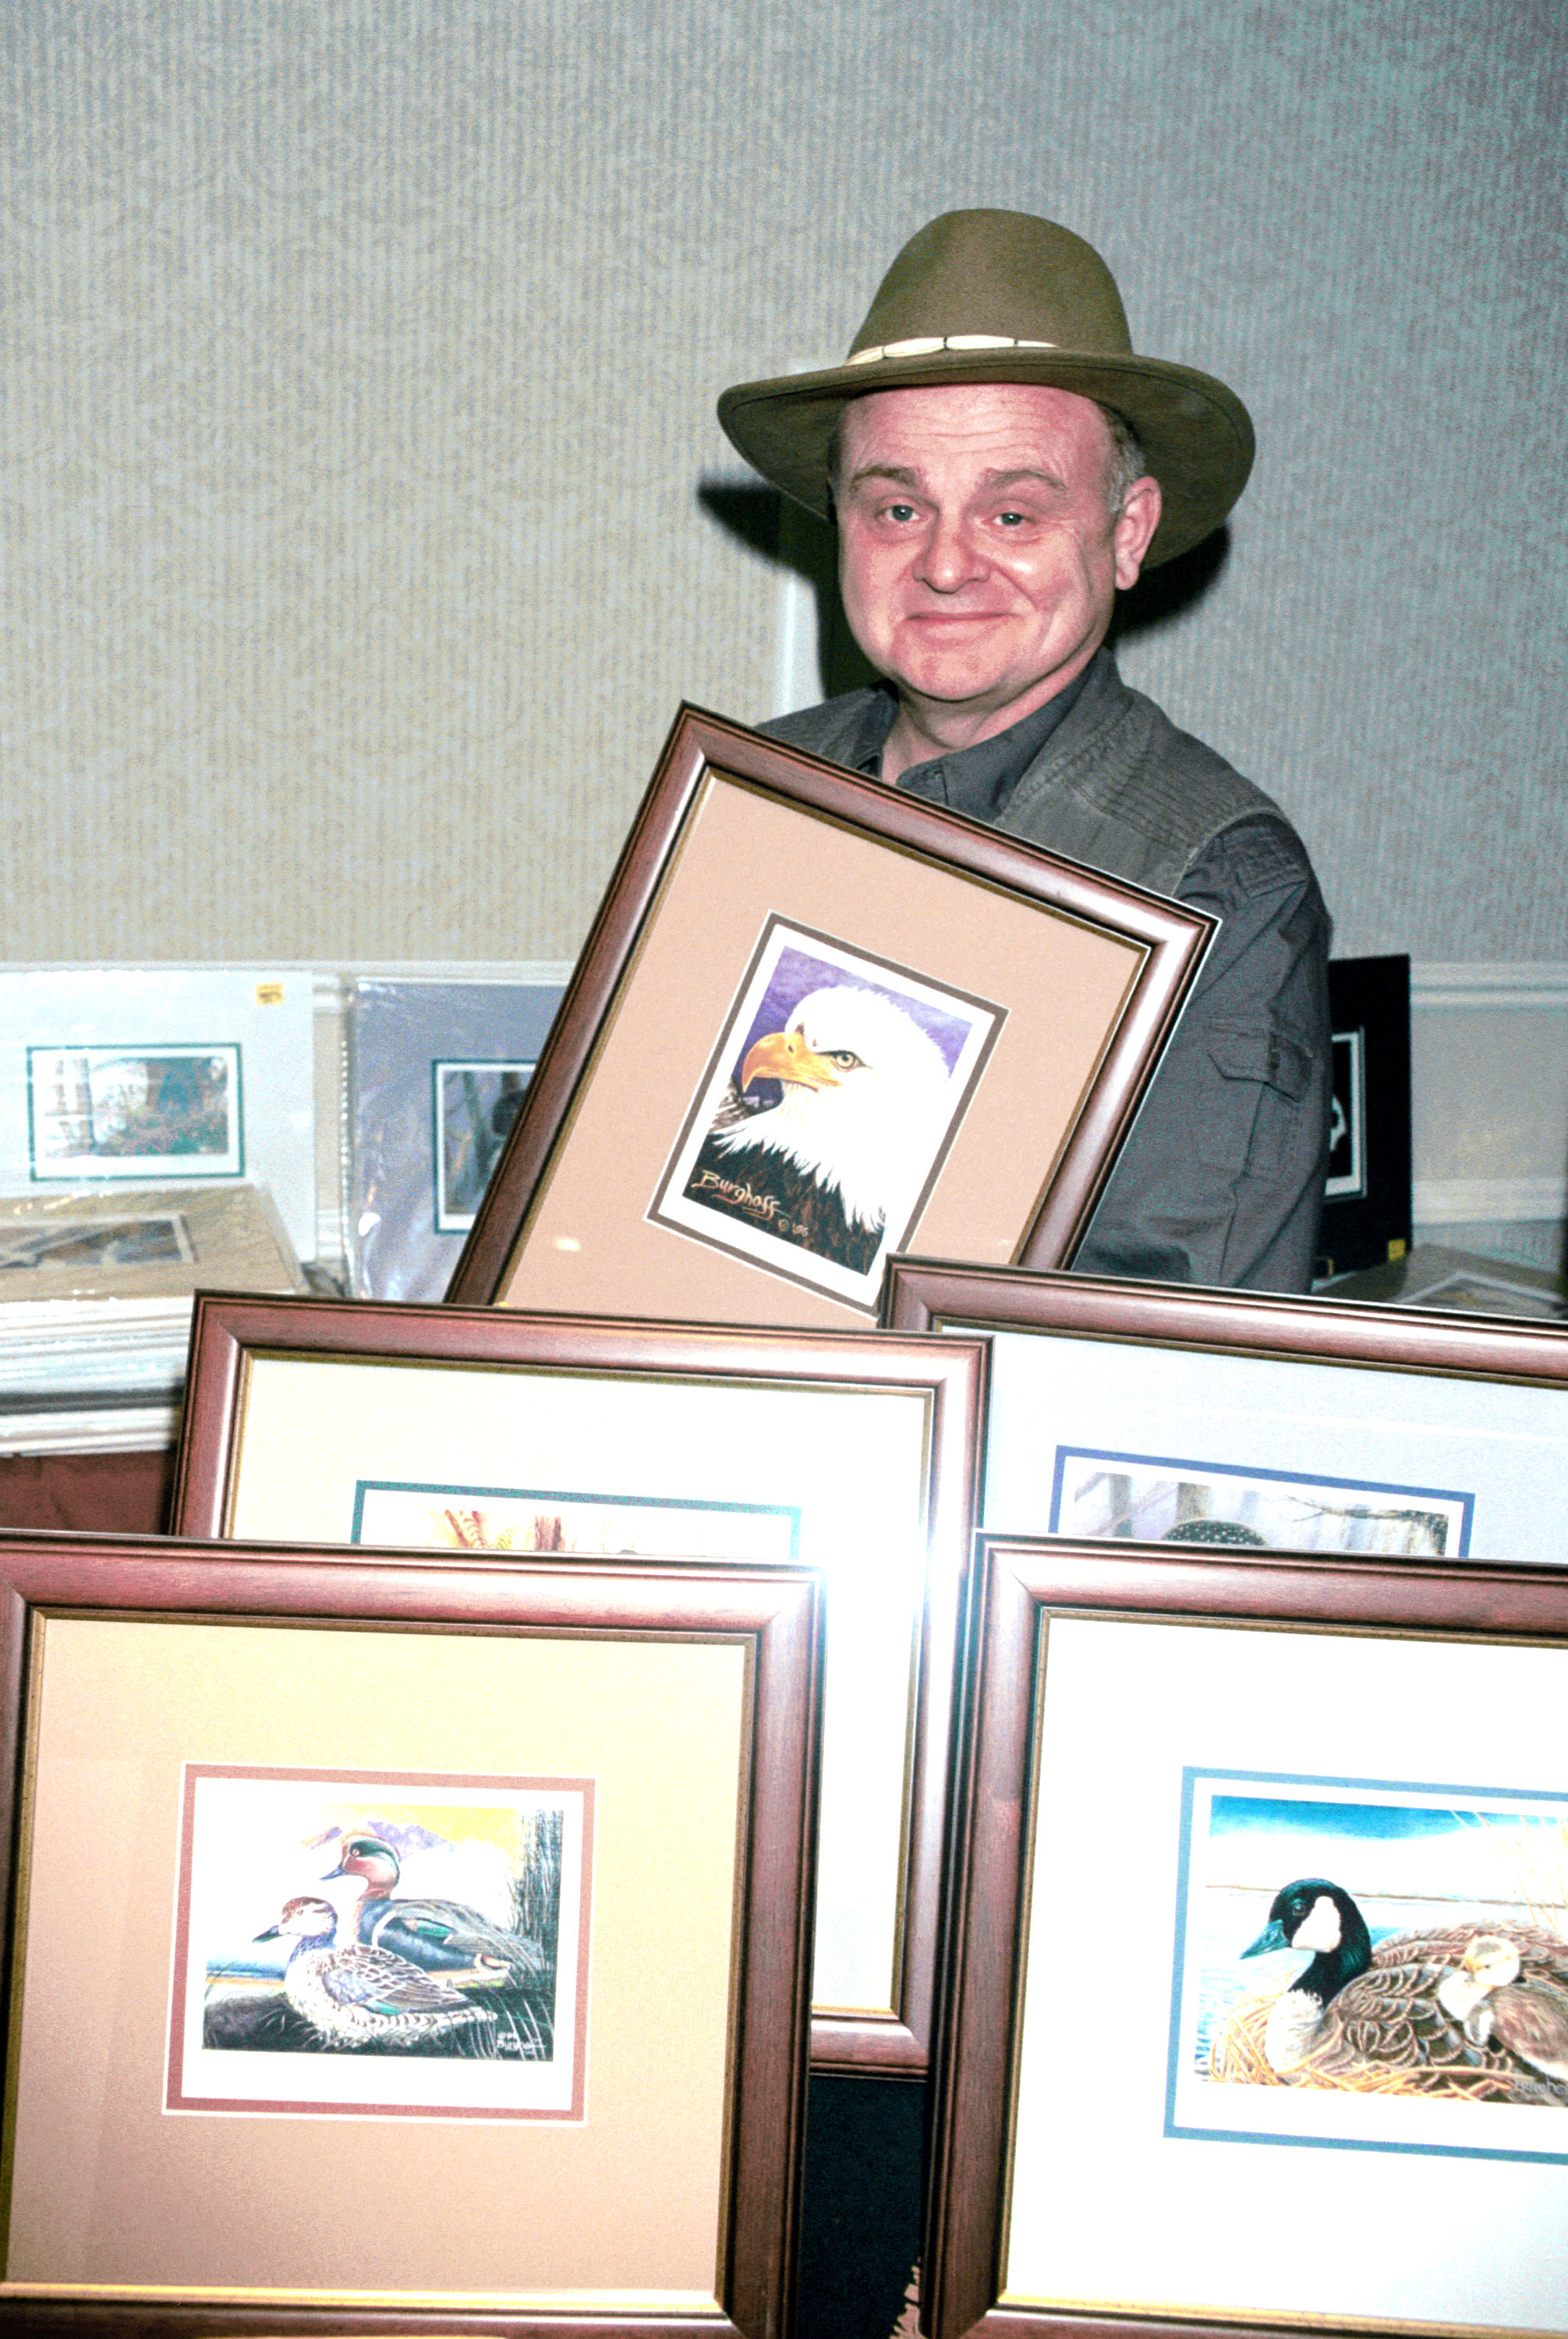 Gary Burghoff at a Hollywood Collectors and Celebrities Show in 2001 | Source: Getty Images